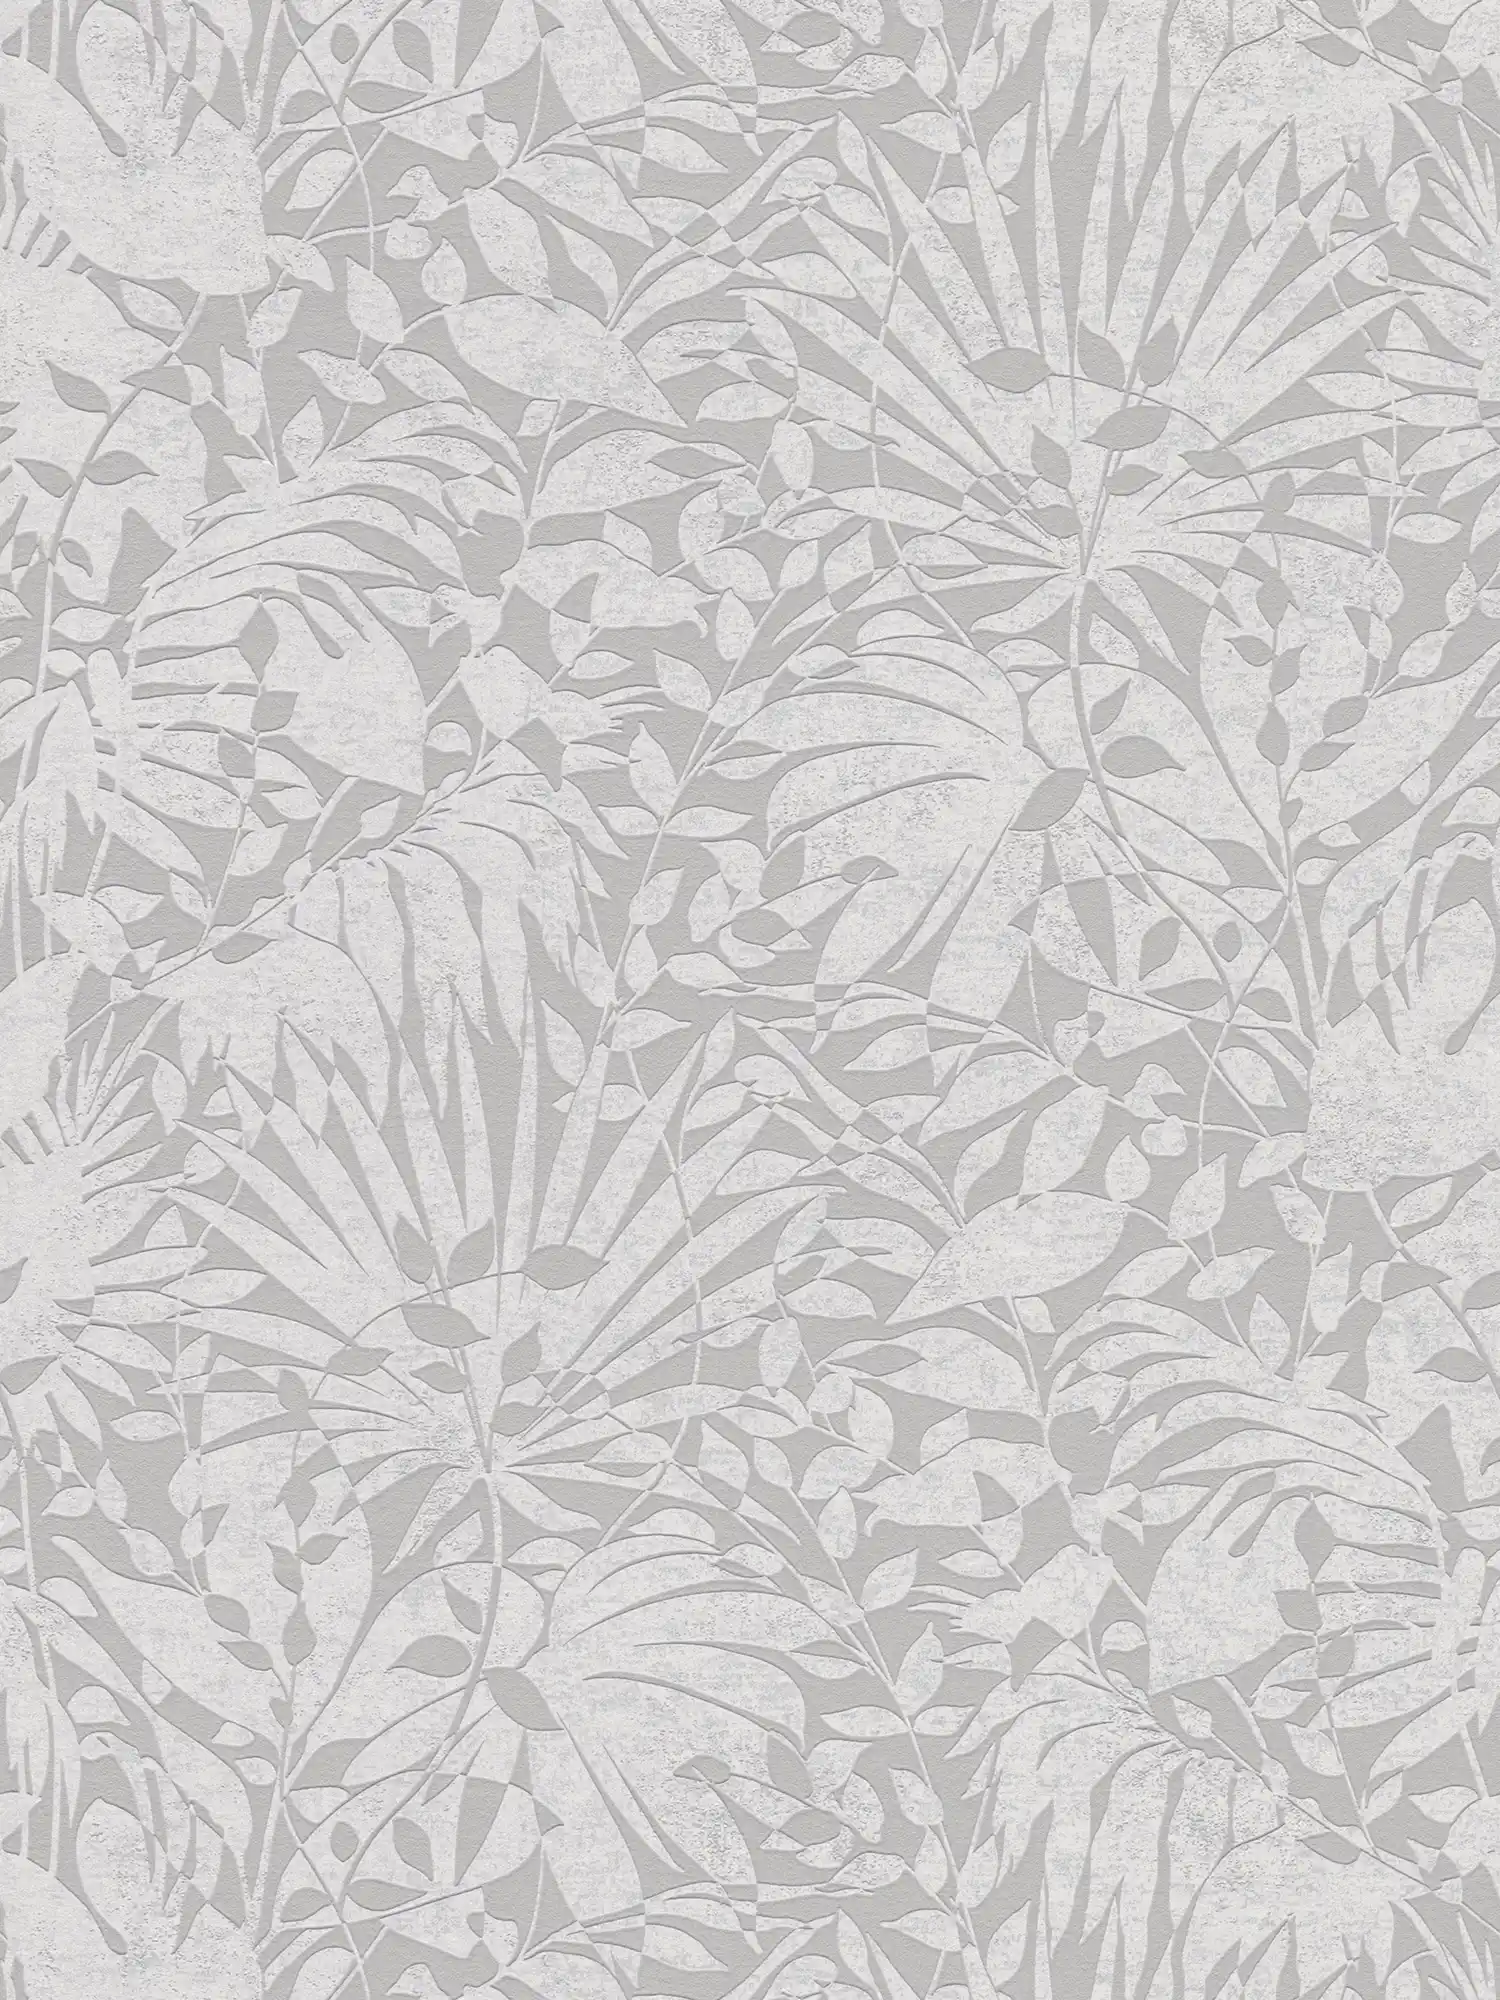 Grey leaves wallpaper with texture details and metallic effect
